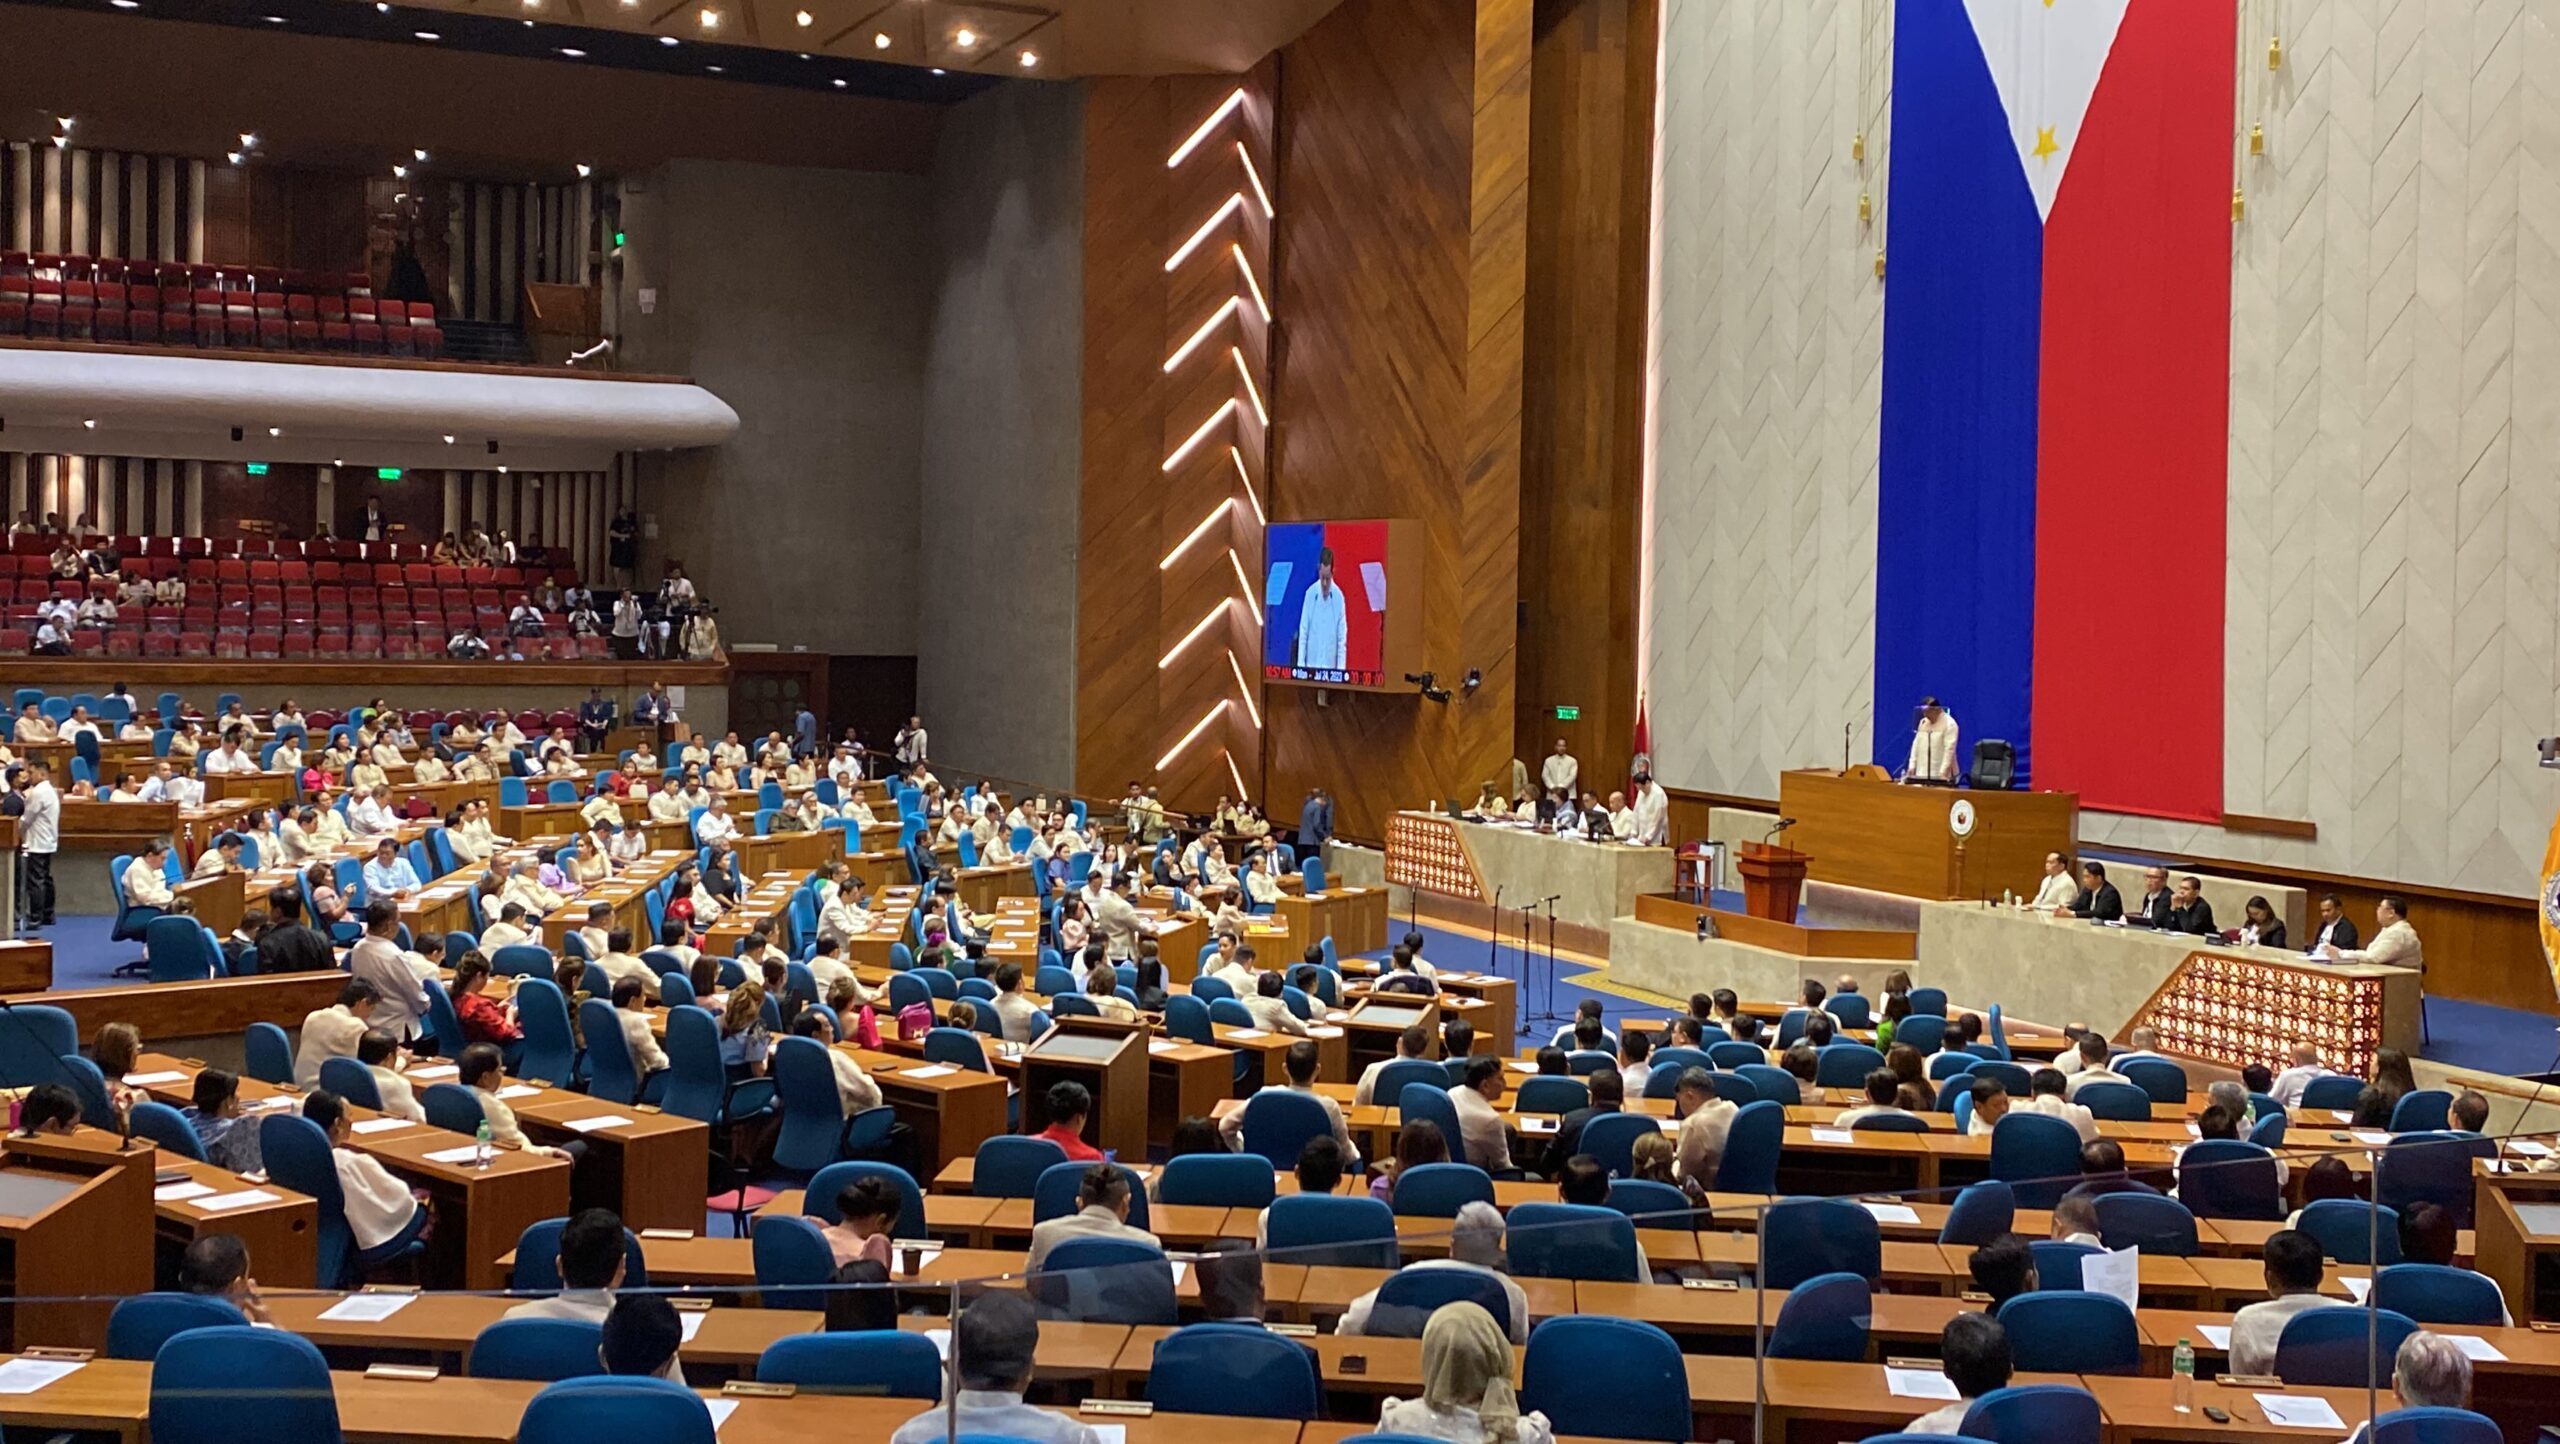 House vows to uphold ‘integrity, honor’ after Duterte attacks